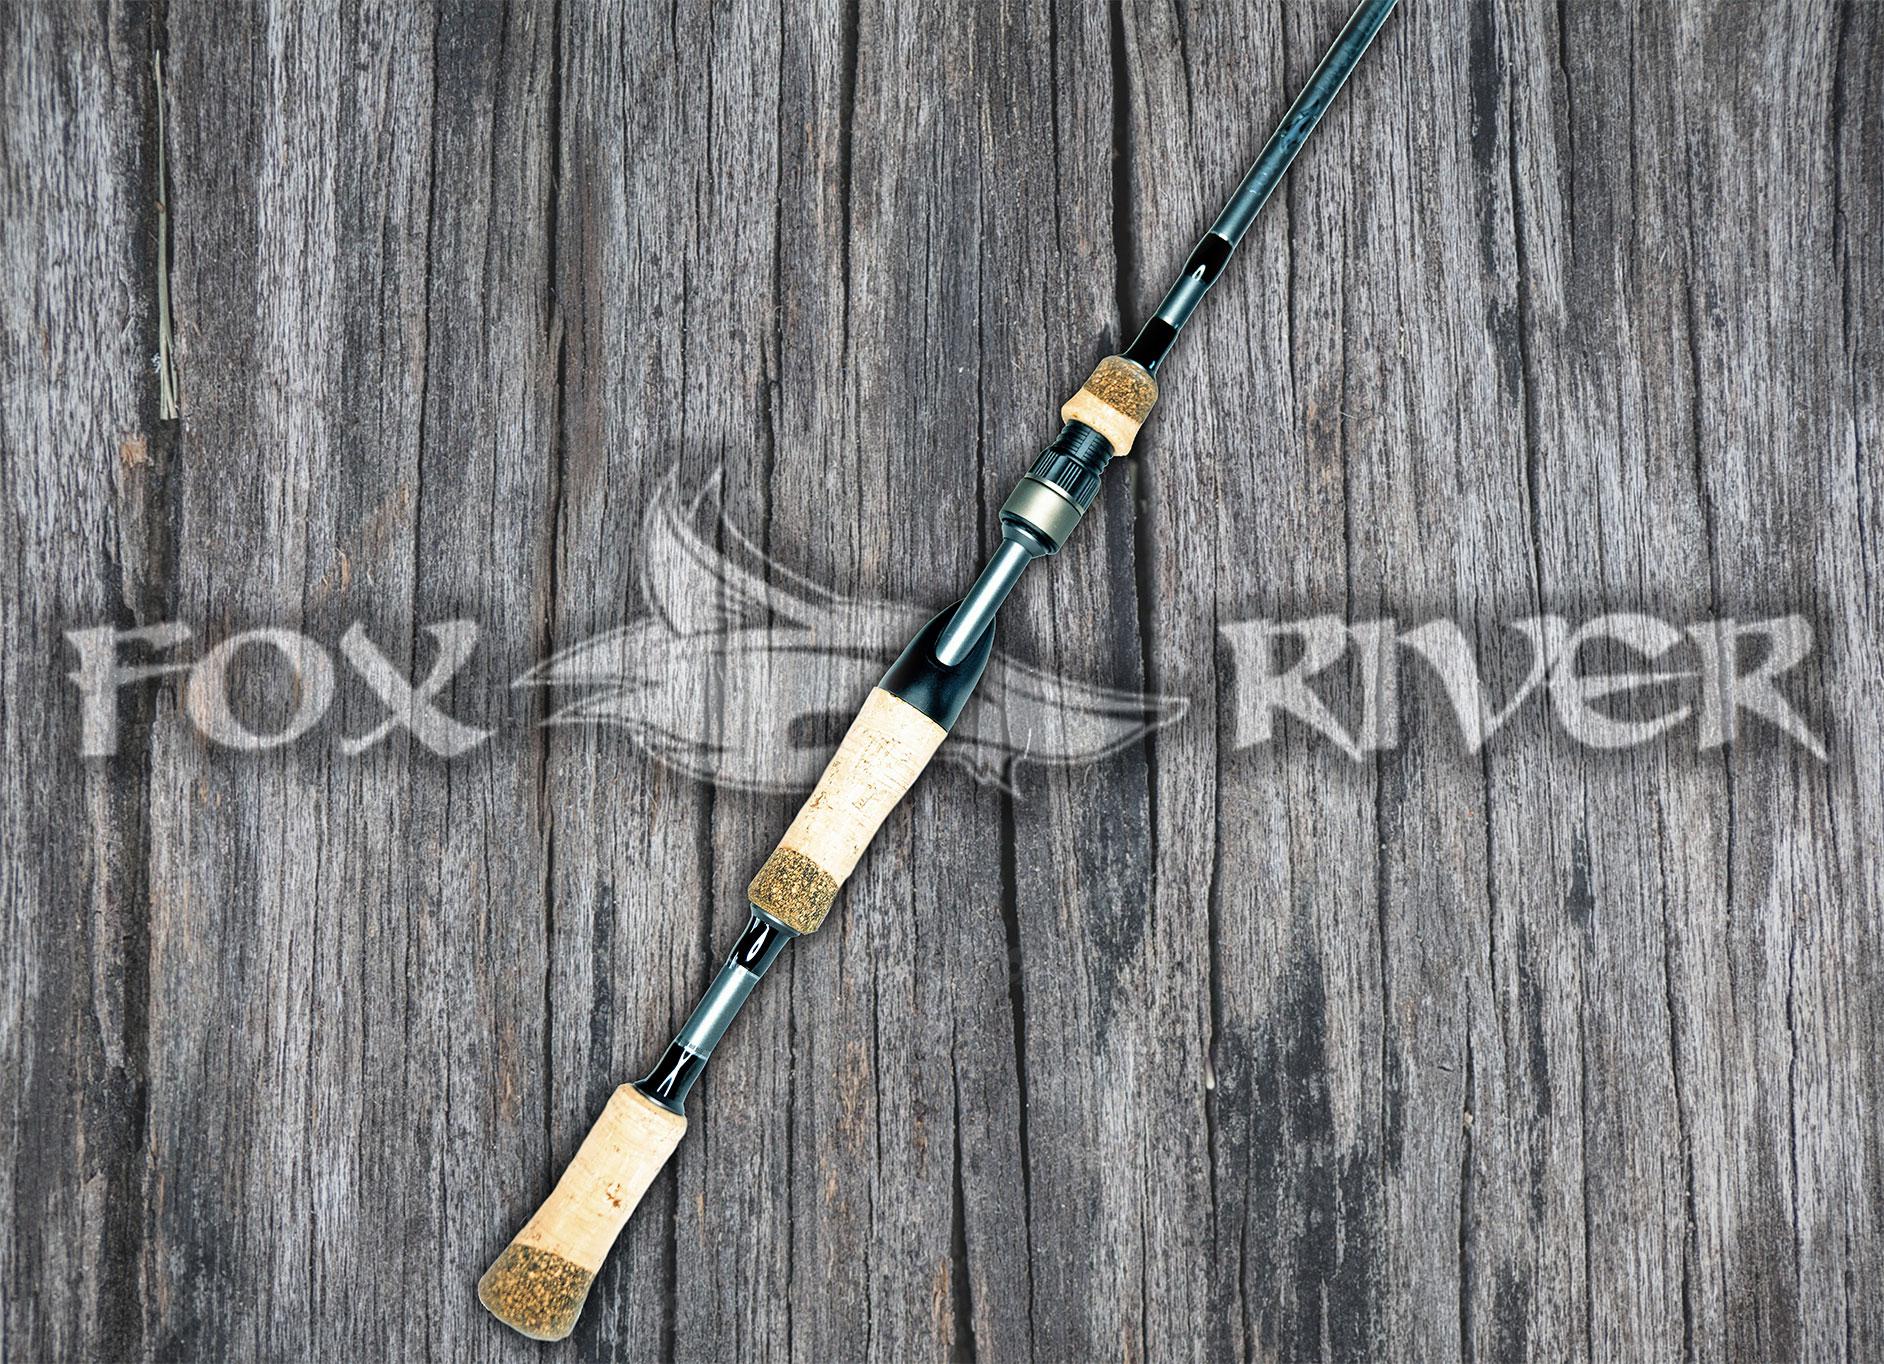 Fox River Lures and Rods - 6' 3 Medium Extra Fast Split-Grip